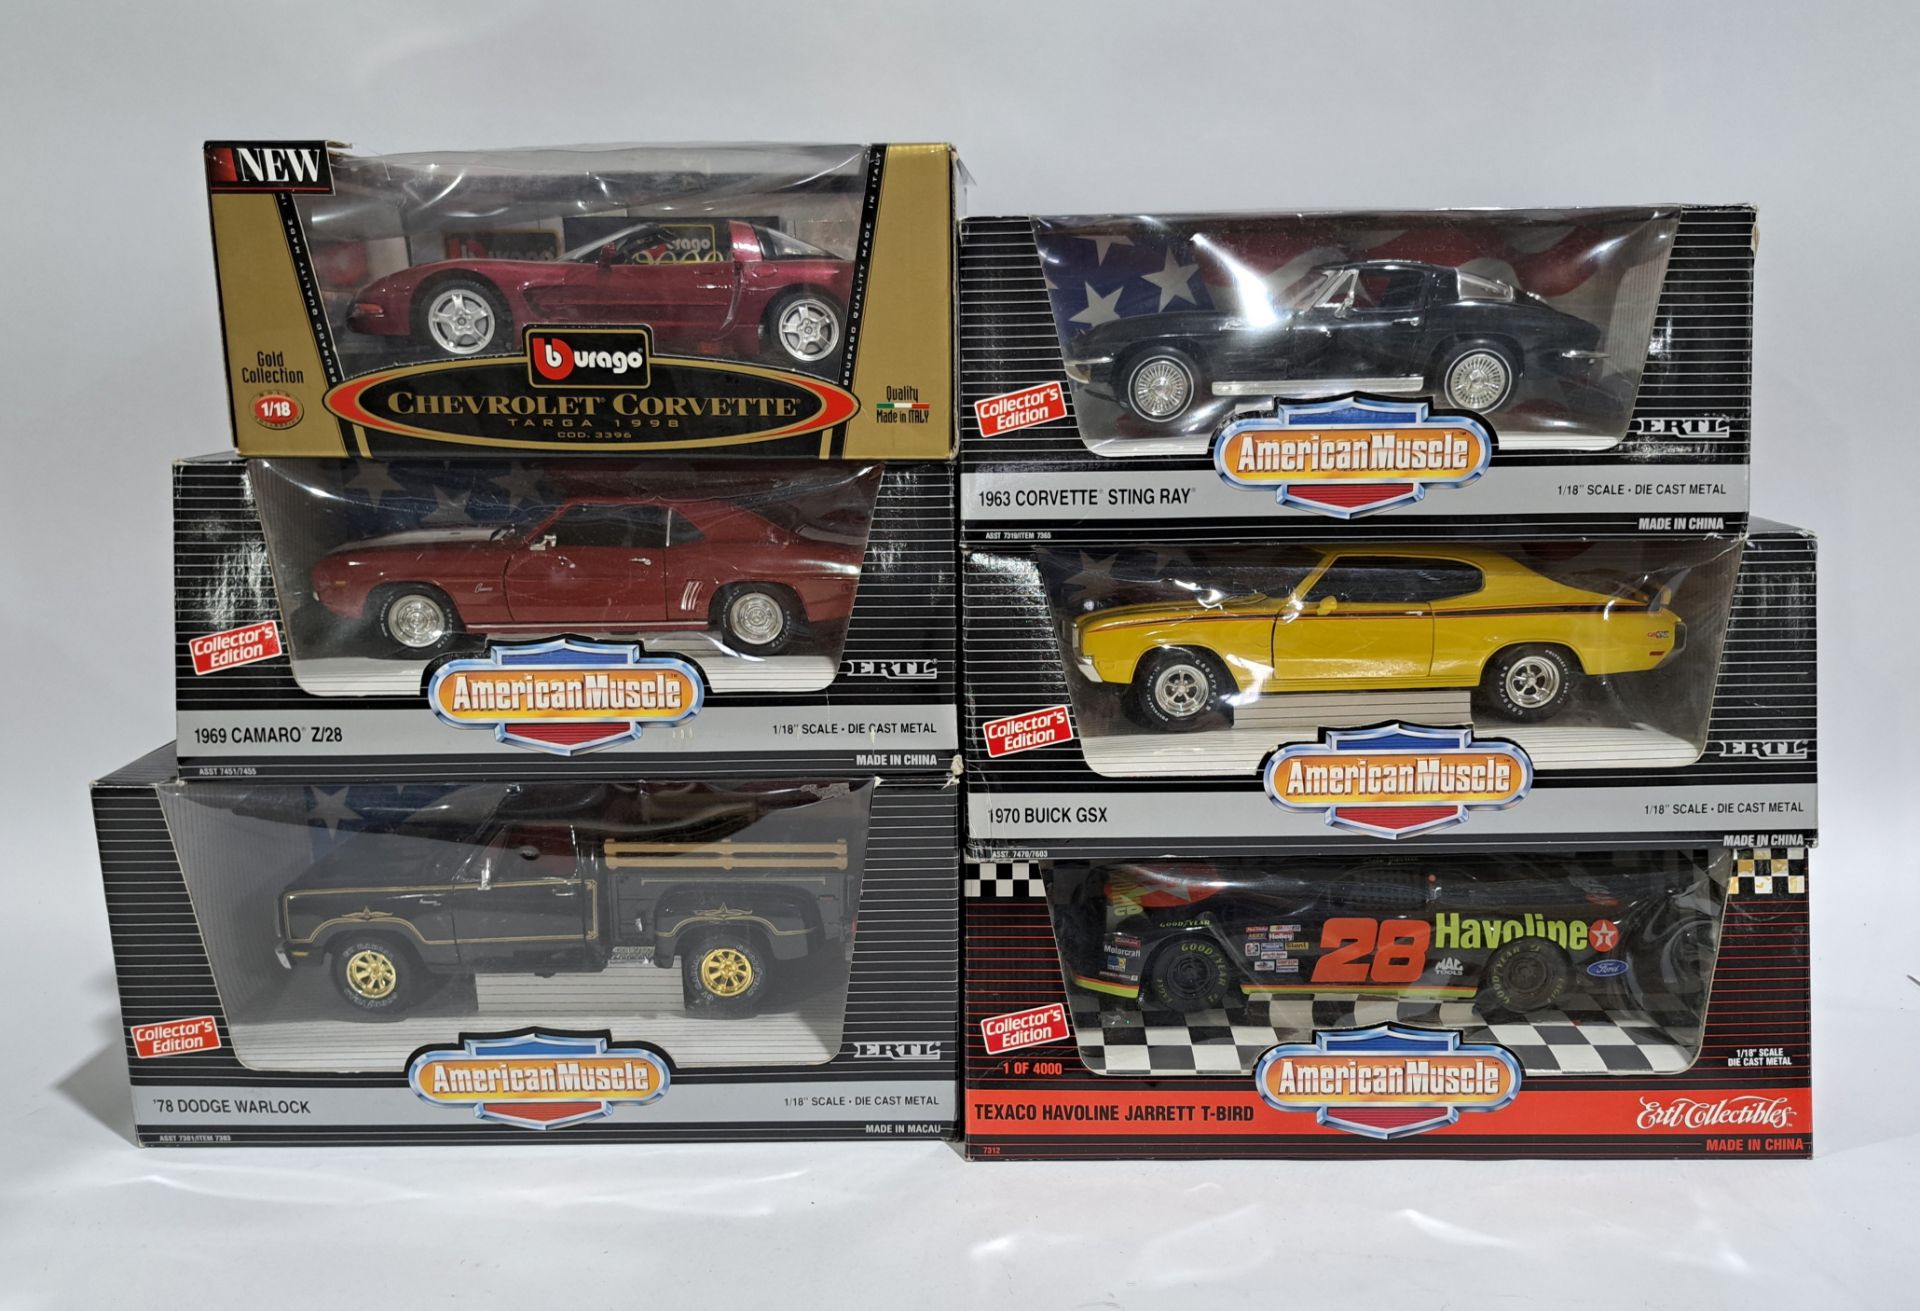 Ertl American Muscle & Bburago 1:18 scale, a boxed group of cars